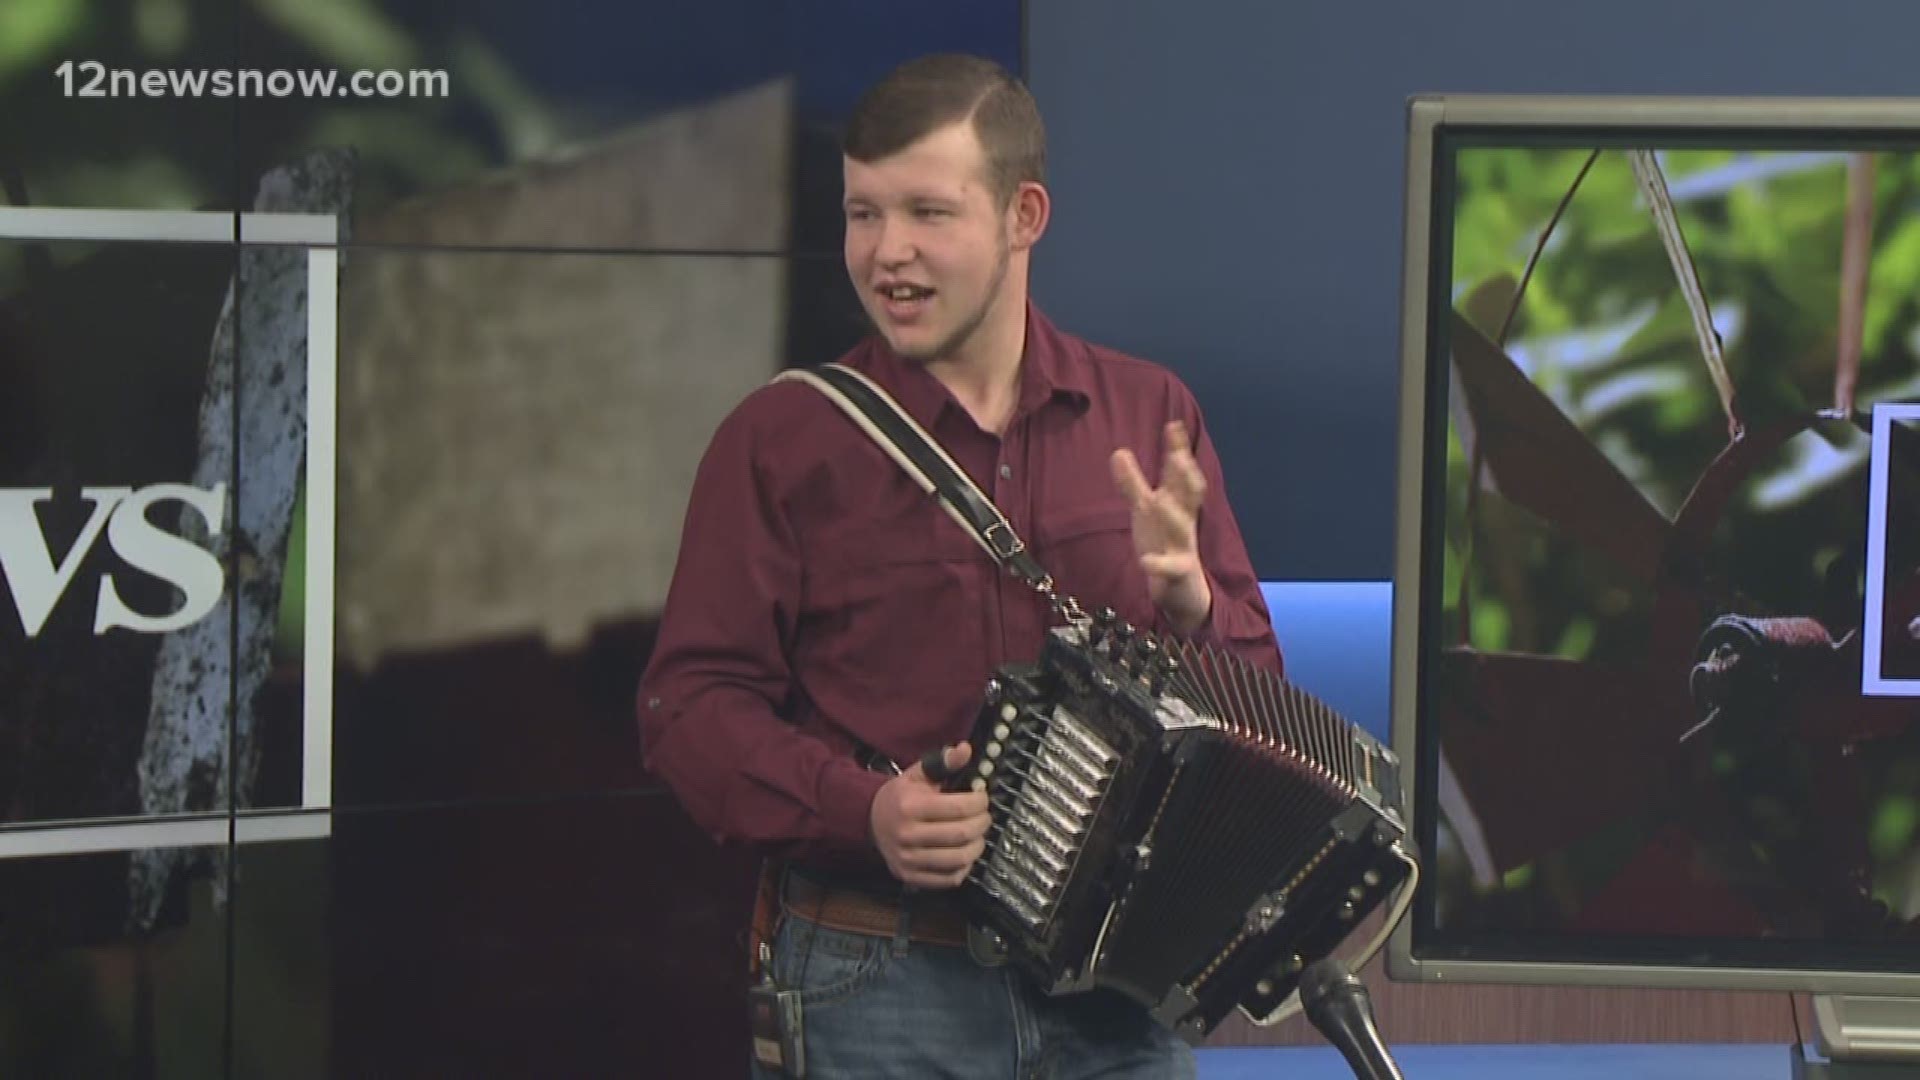 Texas Folk Life and the Big Squeeze are hosting free accordion workshops this Saturday, February 16, from 1 p.m. to 4 p.m. at the Museum of the Gulf Coast.